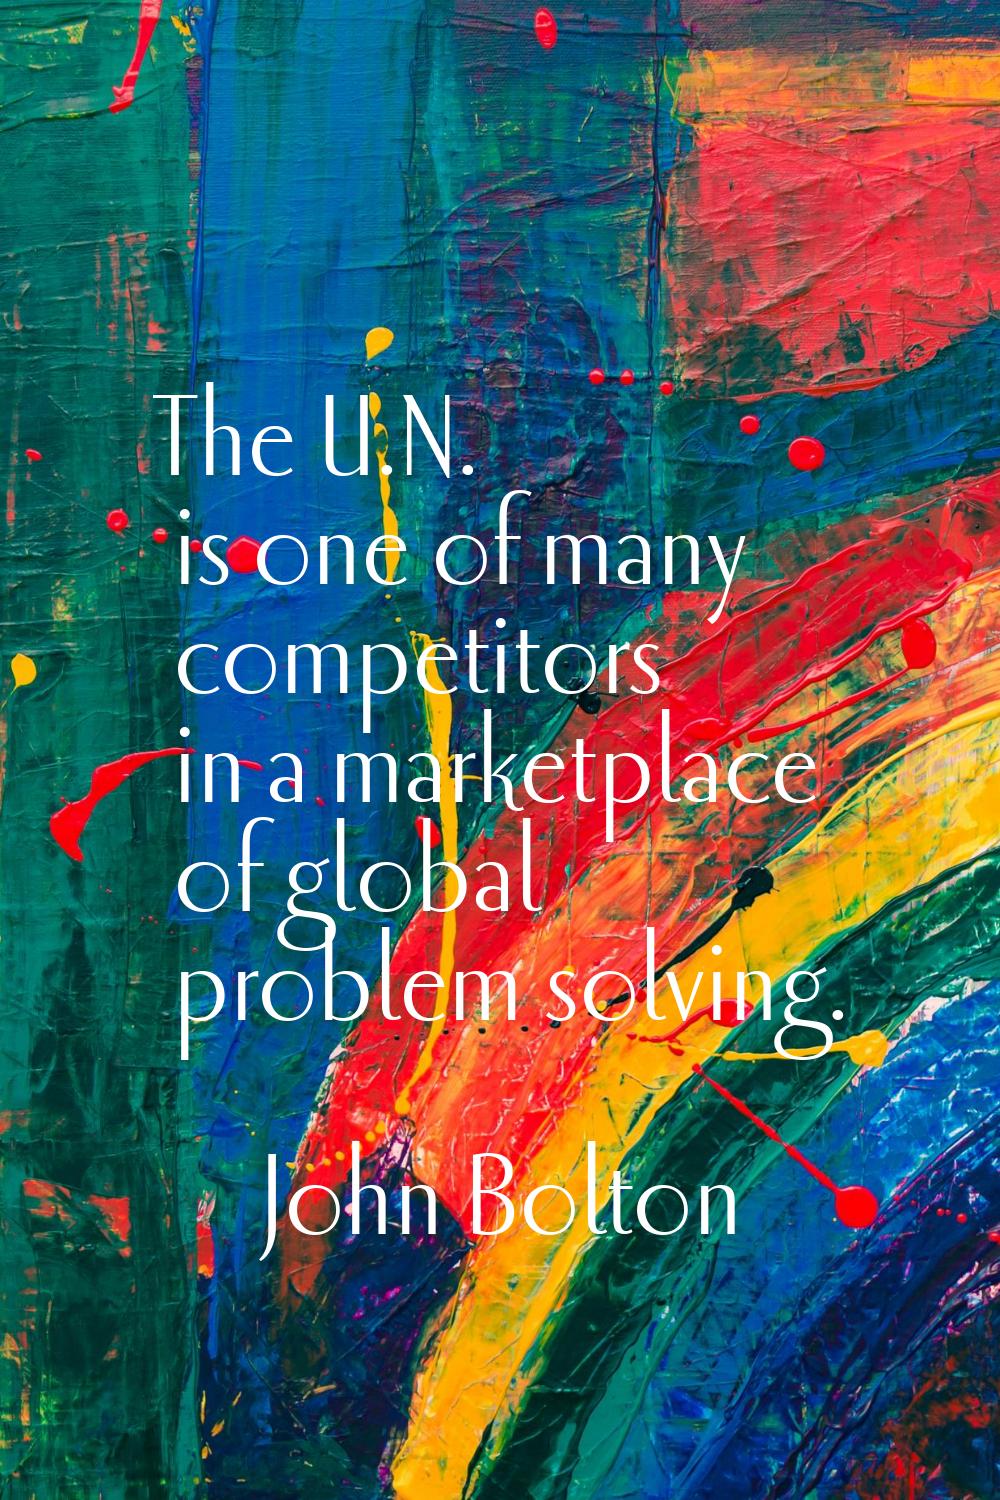 The U.N. is one of many competitors in a marketplace of global problem solving.